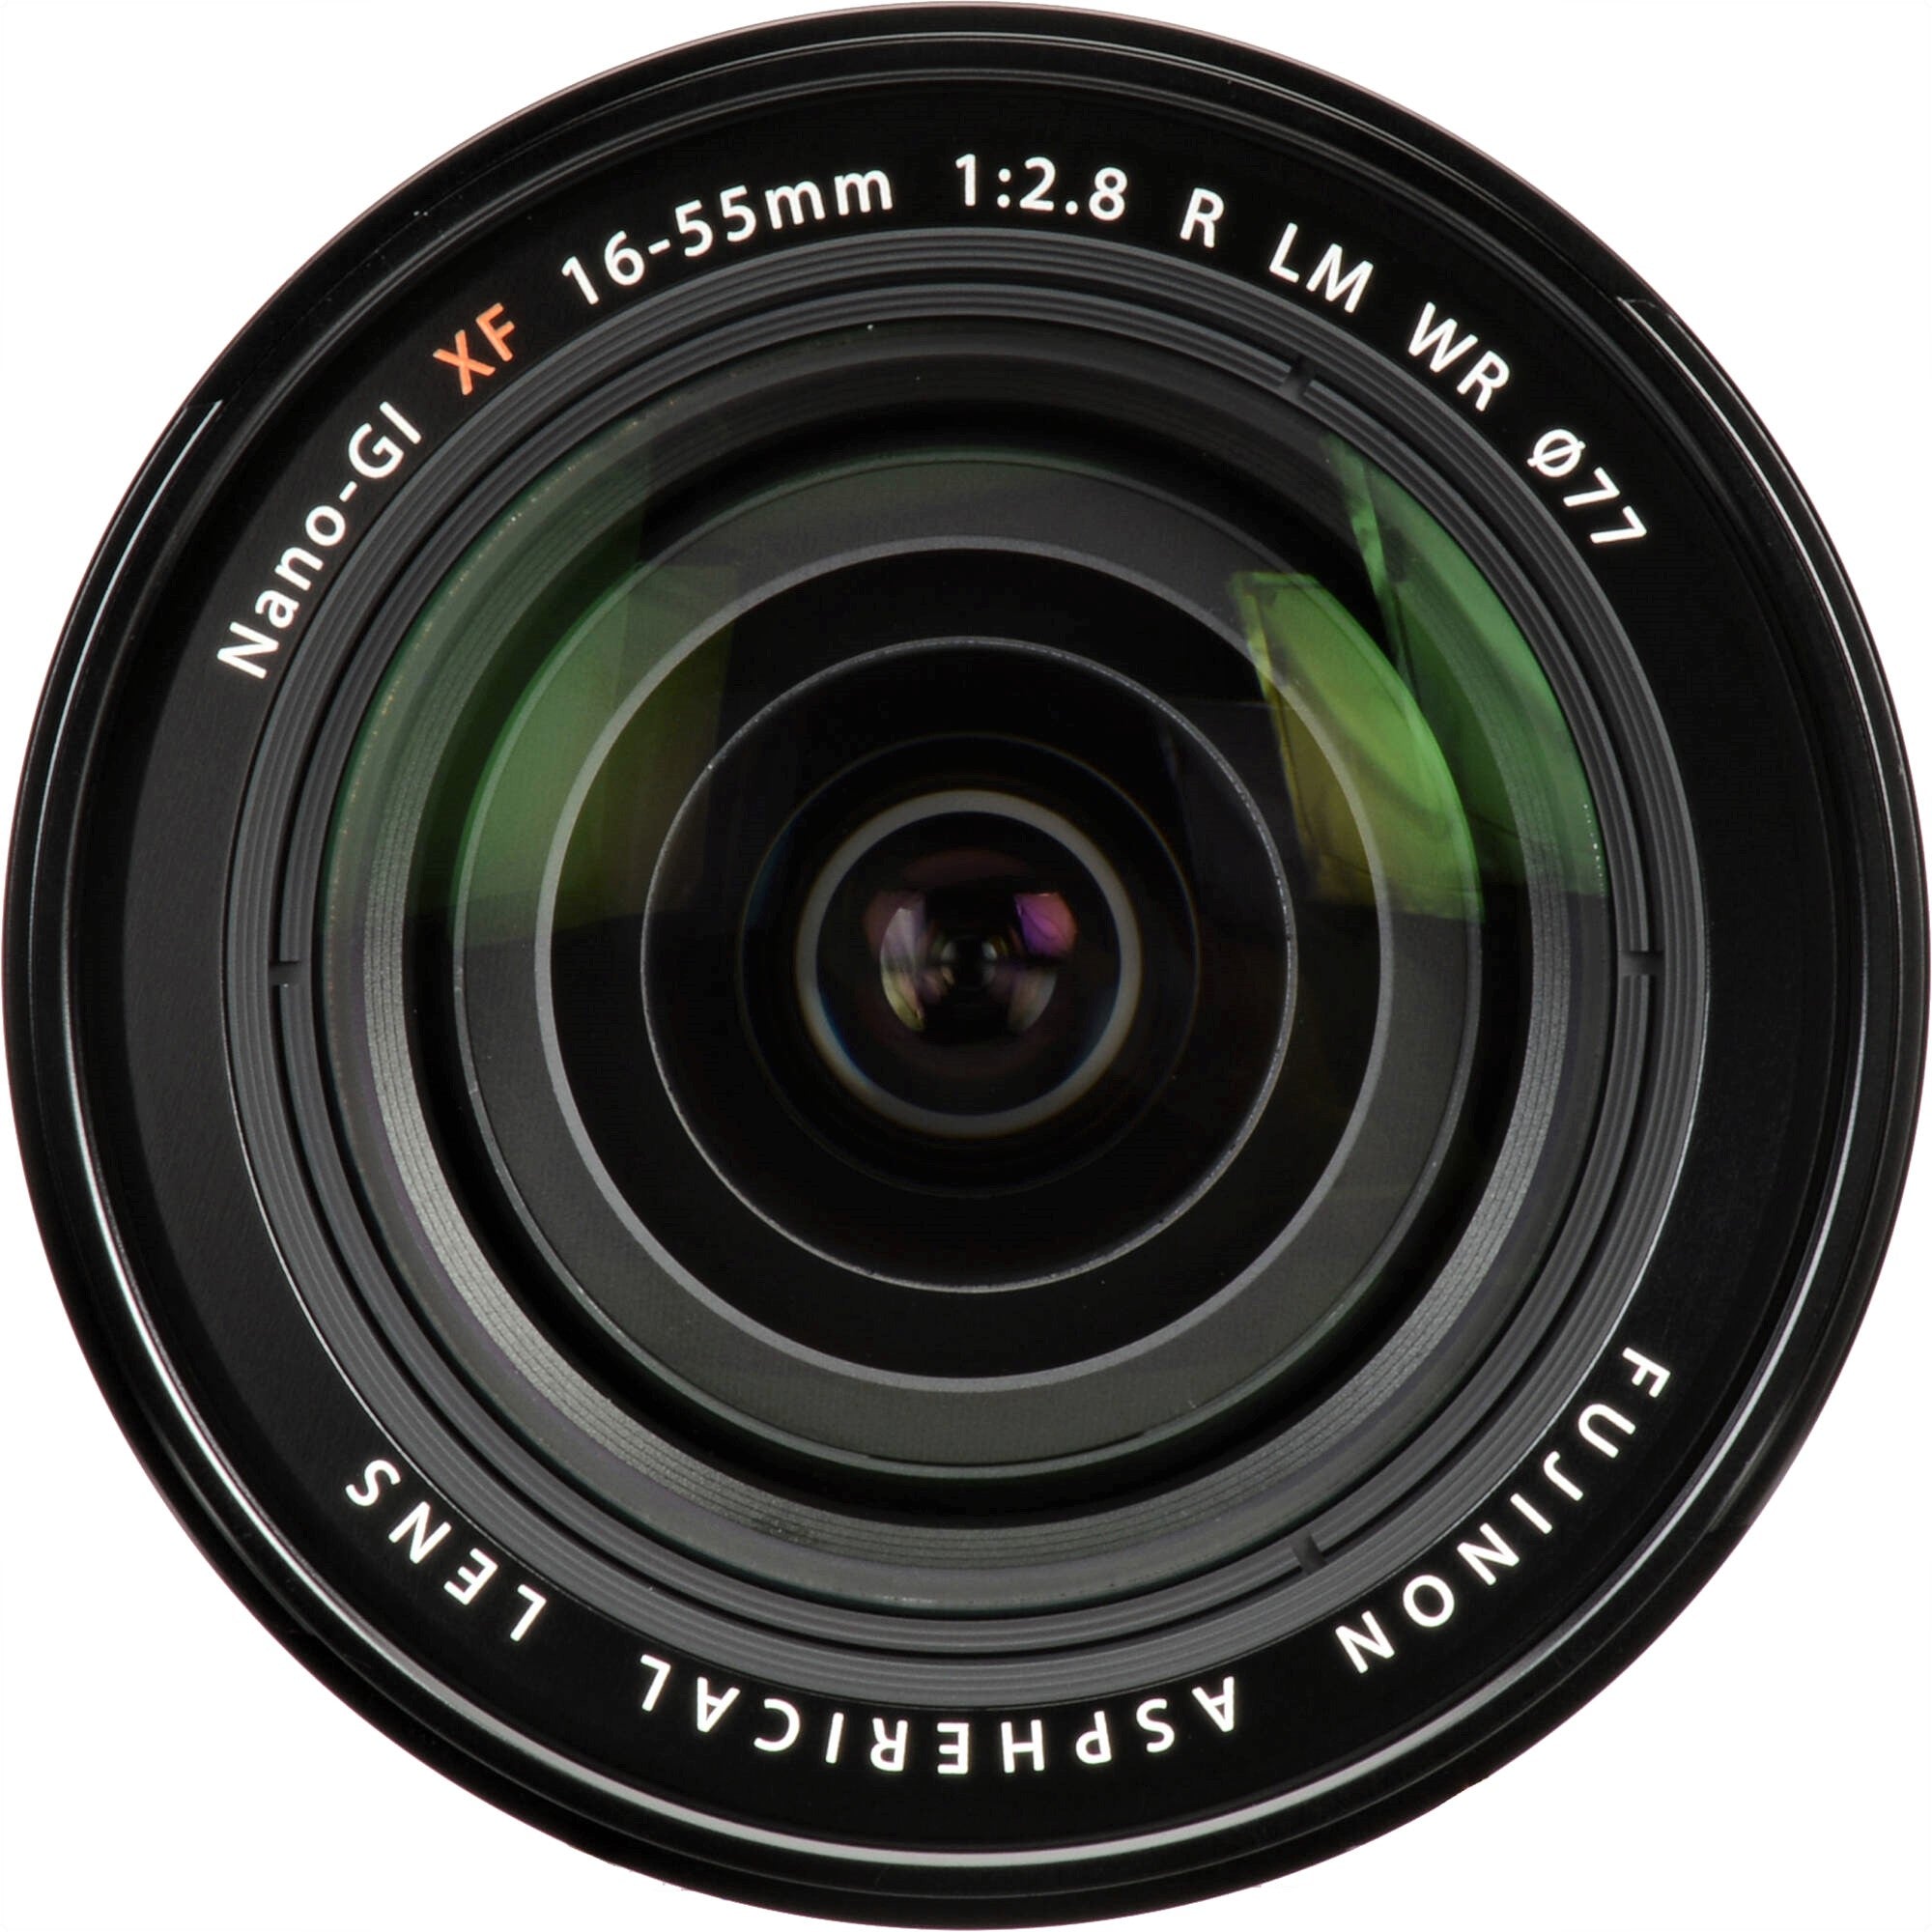 FUJIFILM XF 16-55mm f/2.8 R LM WR Lens - Front View